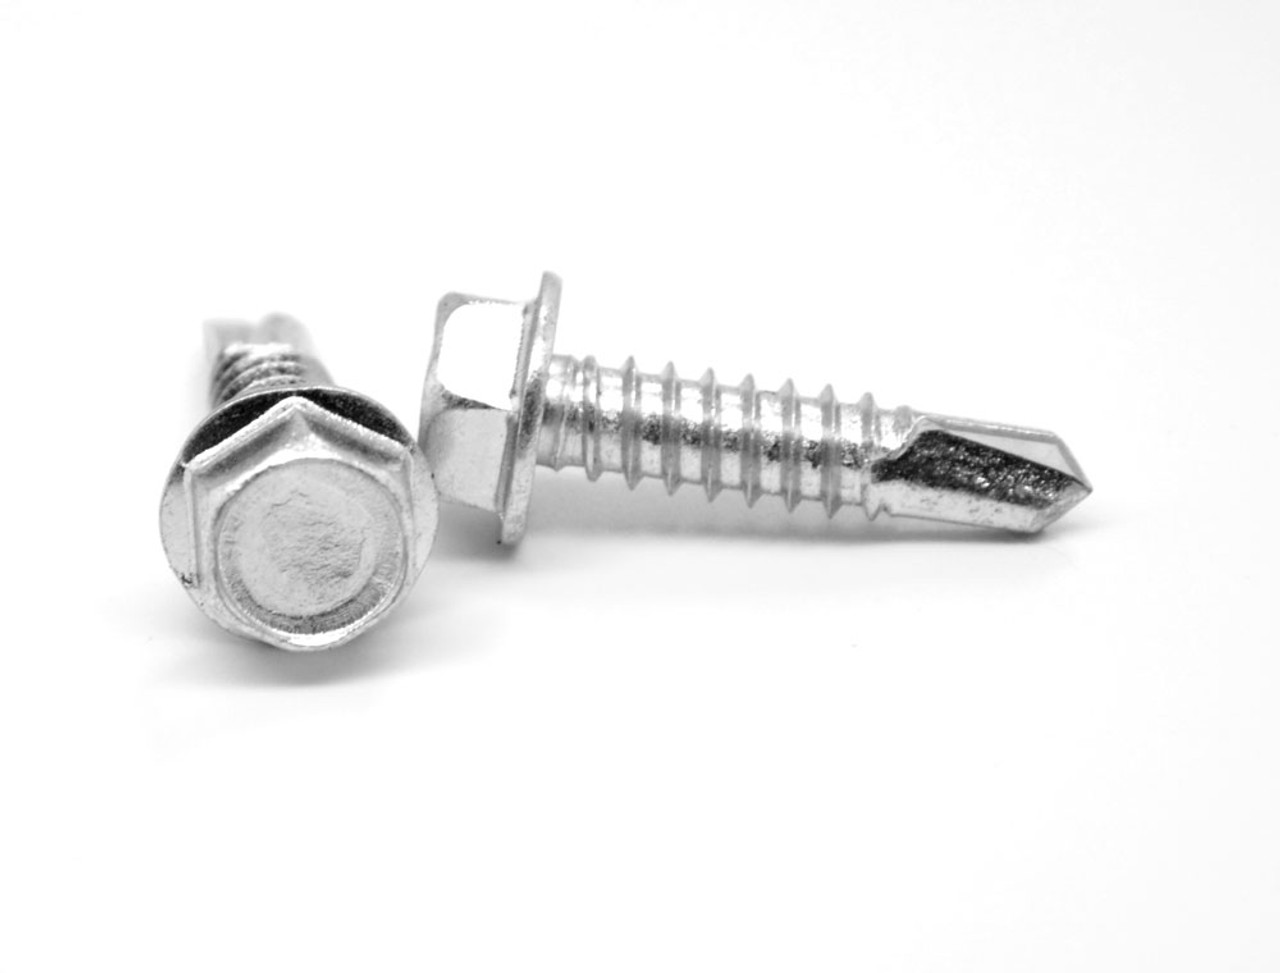 #12-14 x 1 1/4" (FT) Self Drilling Screw Hex Washer Head #3 Point Stainless Steel 18-8